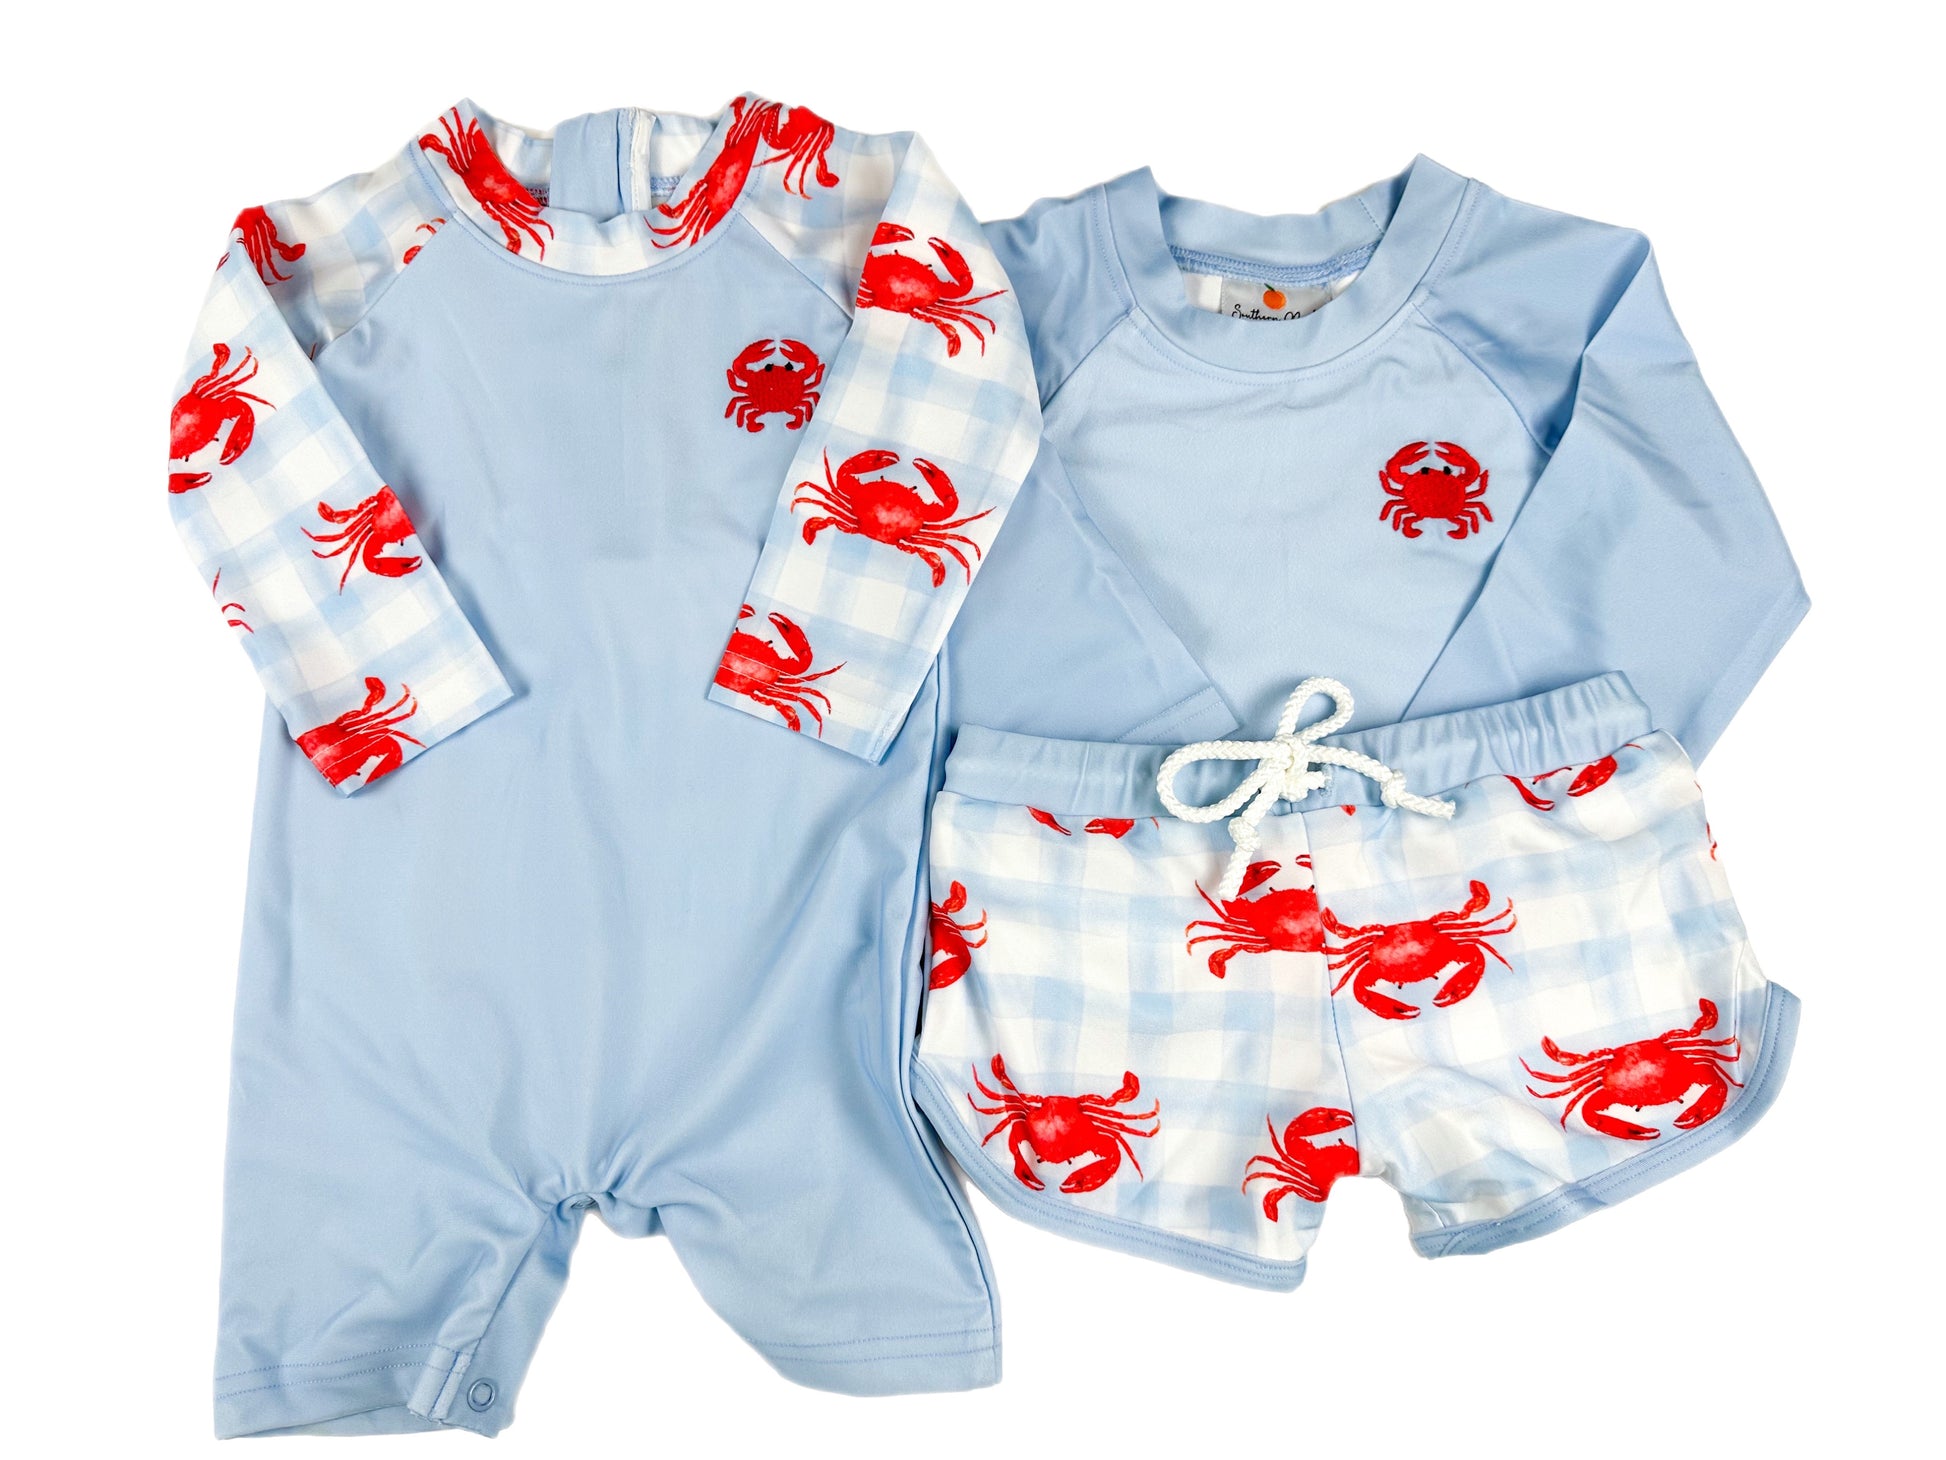 boy's crab swimsuits southern peach smocks